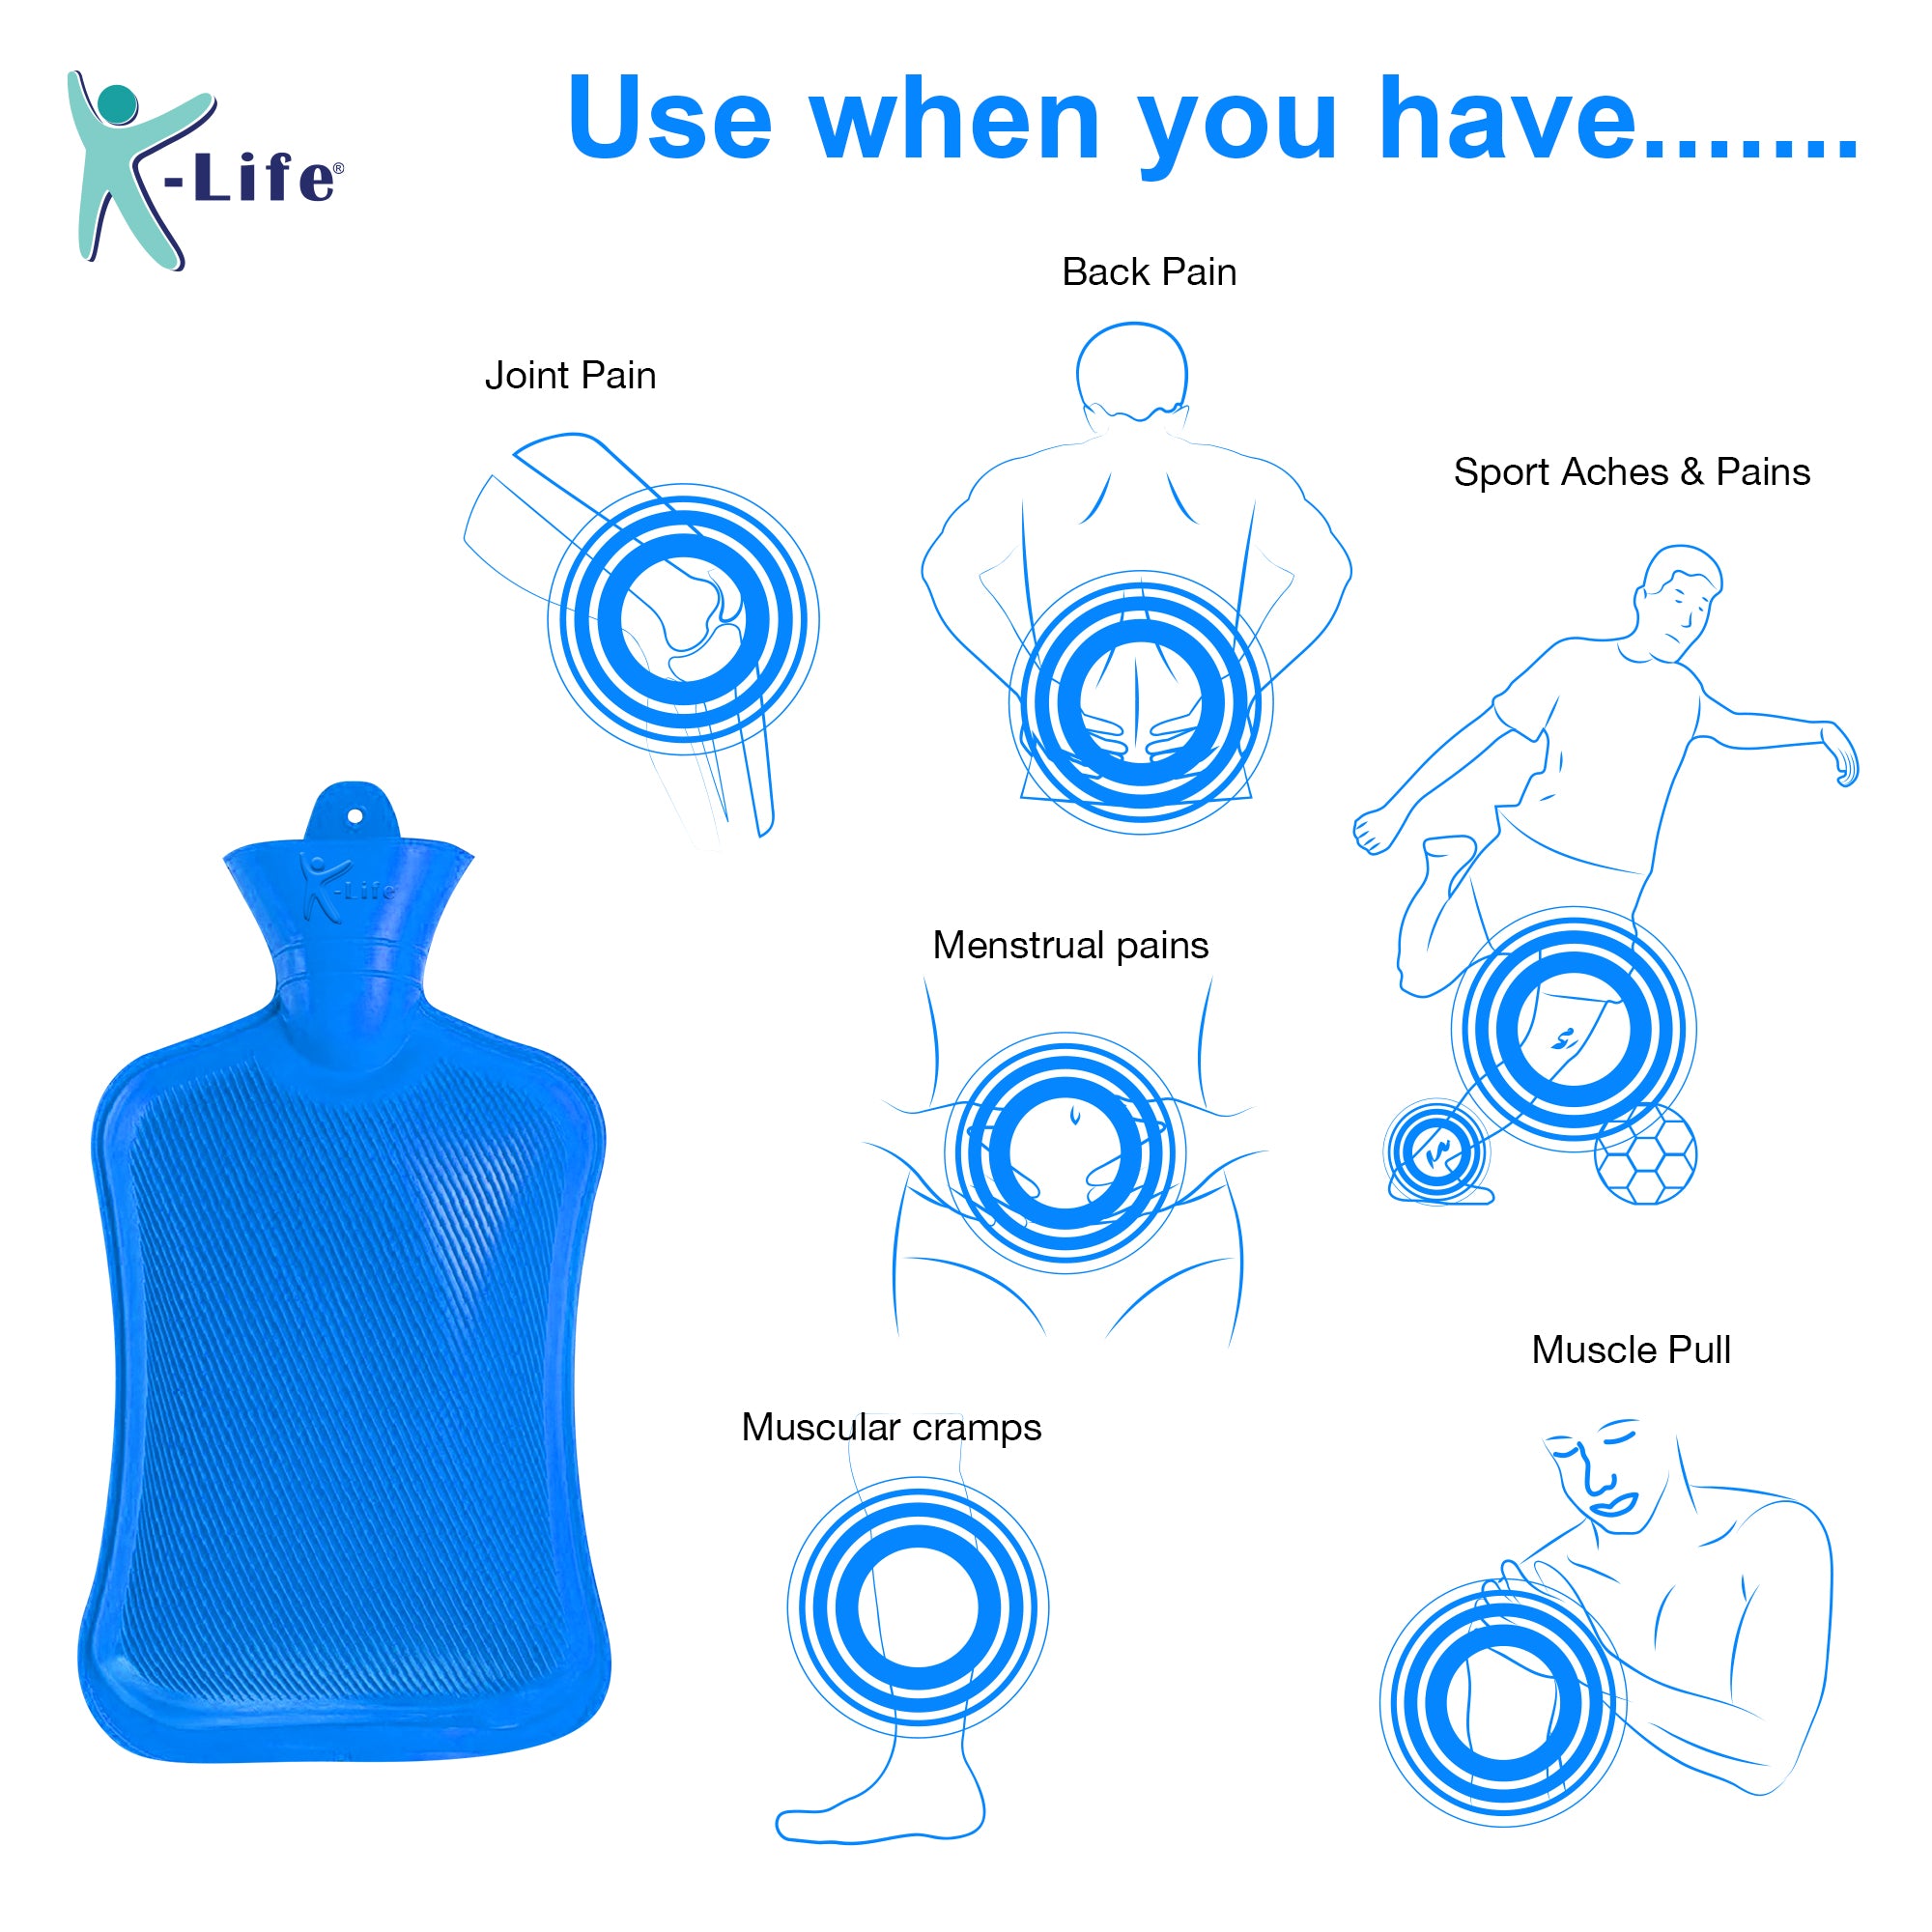 K-life Thick Rubber Non-electrical Hot Water Bag (Blue)